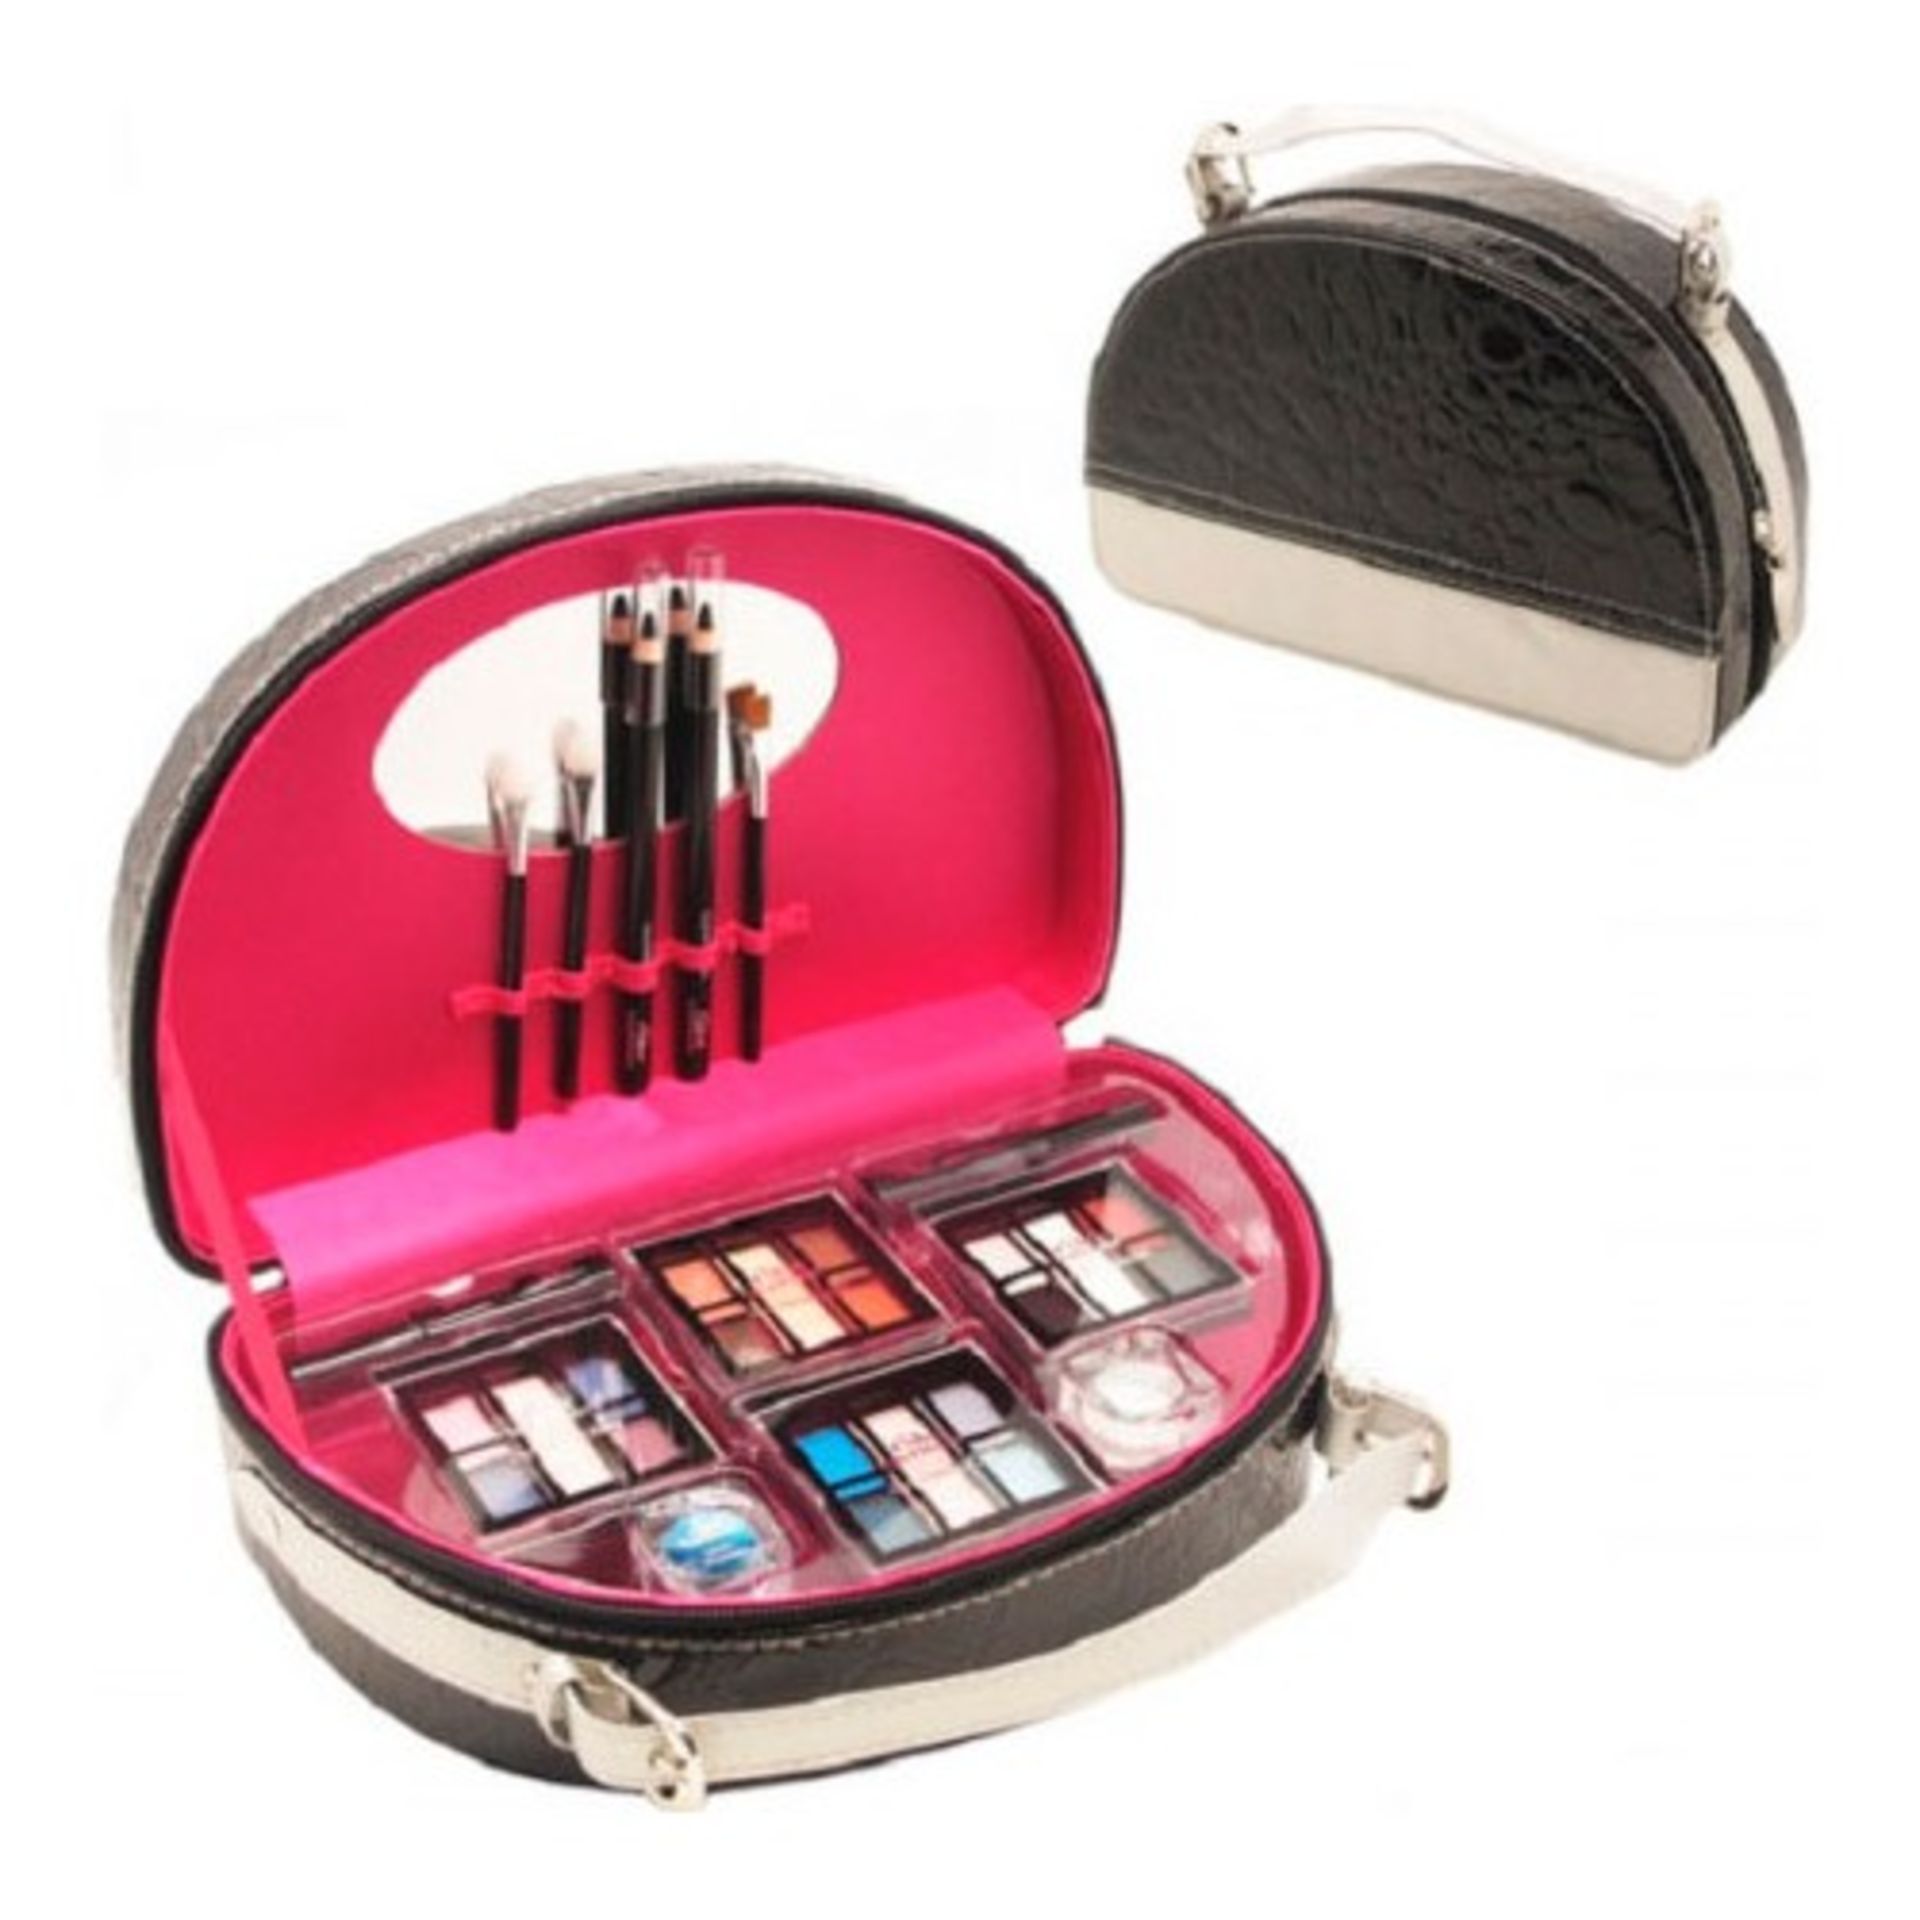 + VAT Brand New 29 Piece Makeup Collection By The Color Institute - Includes 20 Eyeshadow Shades, 2